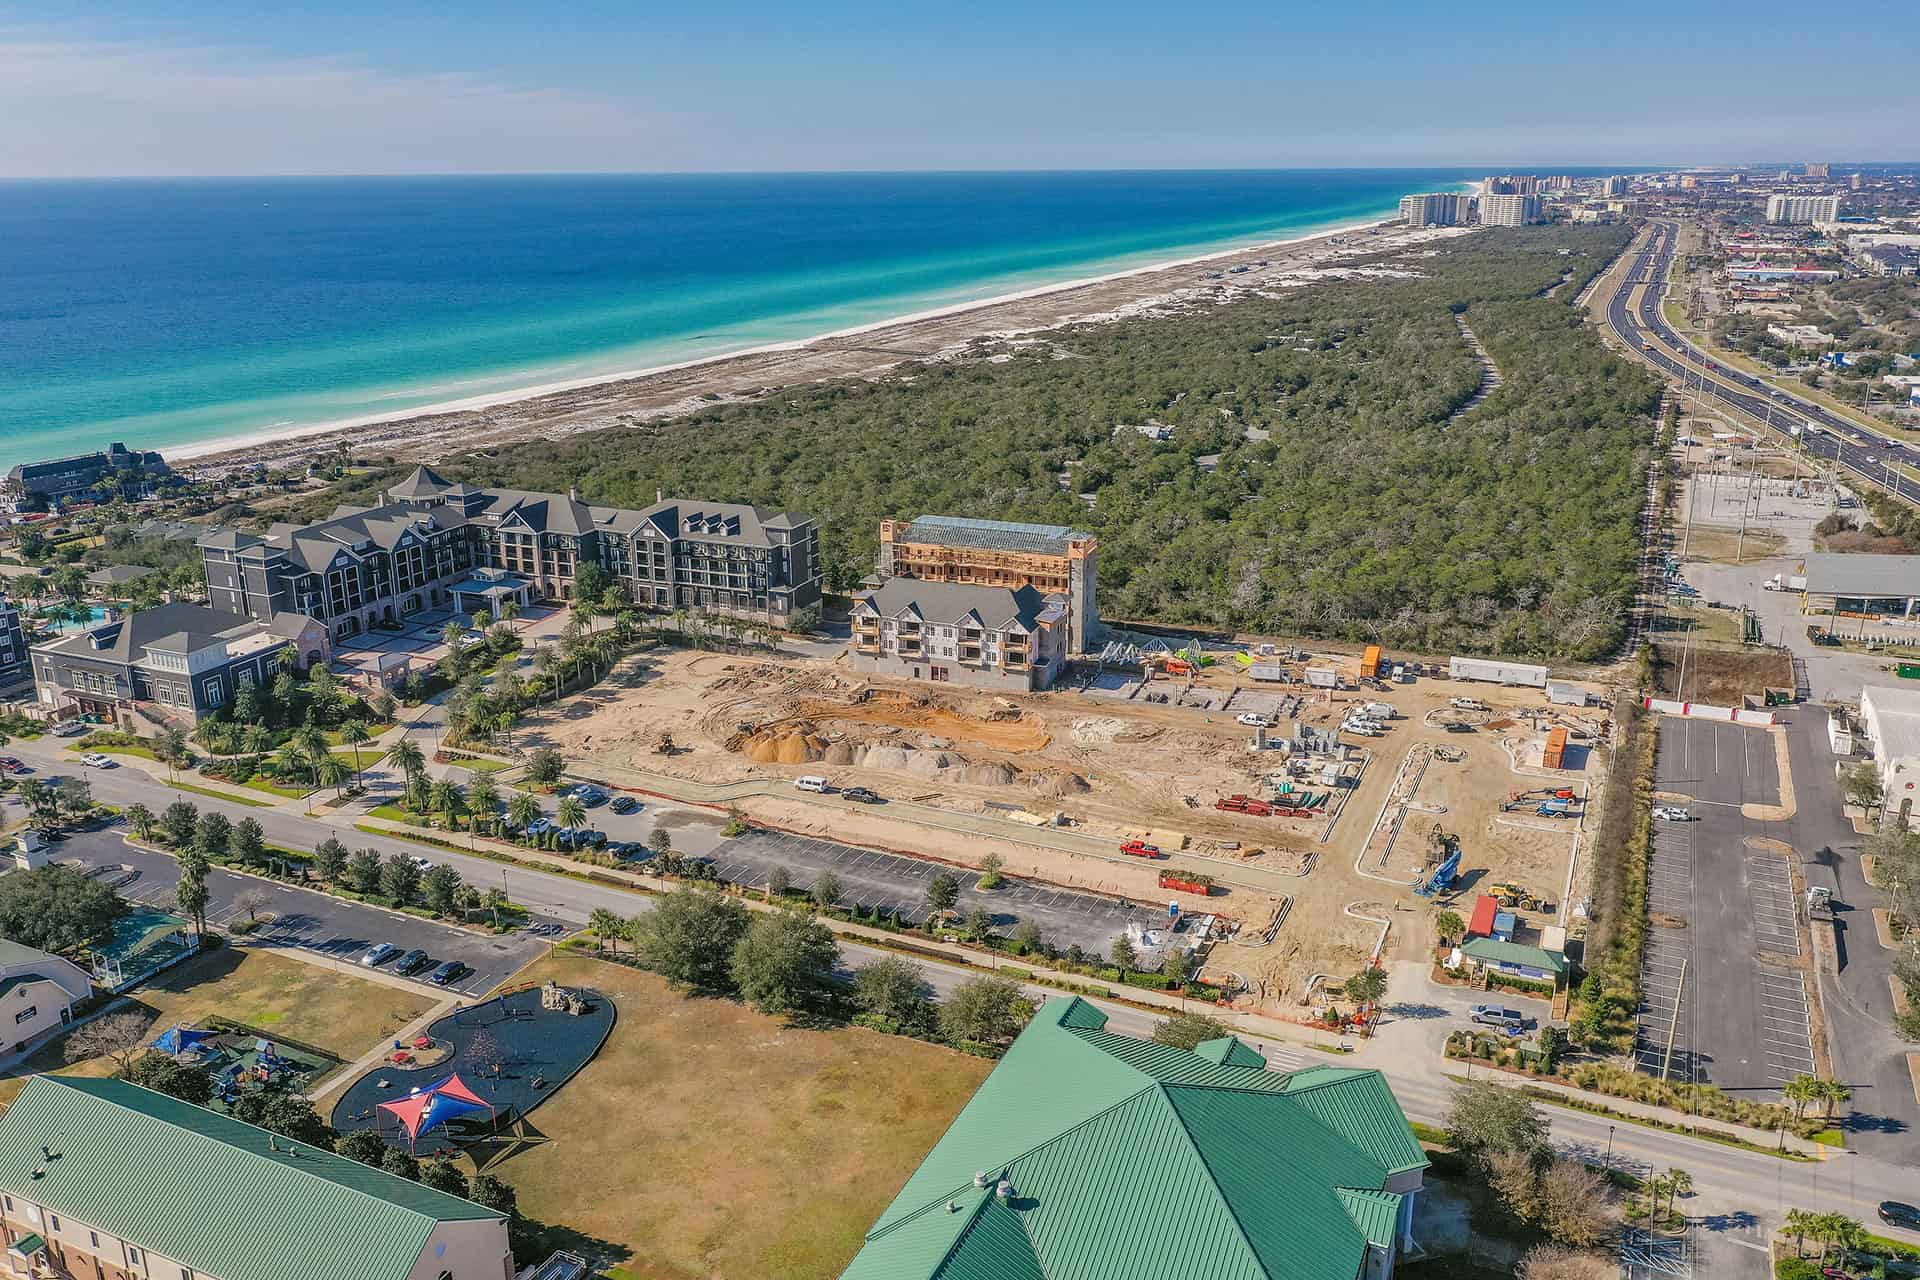 Parkside_at_Henderson_Beach_Resort_January_2021 drone photo looking southwest